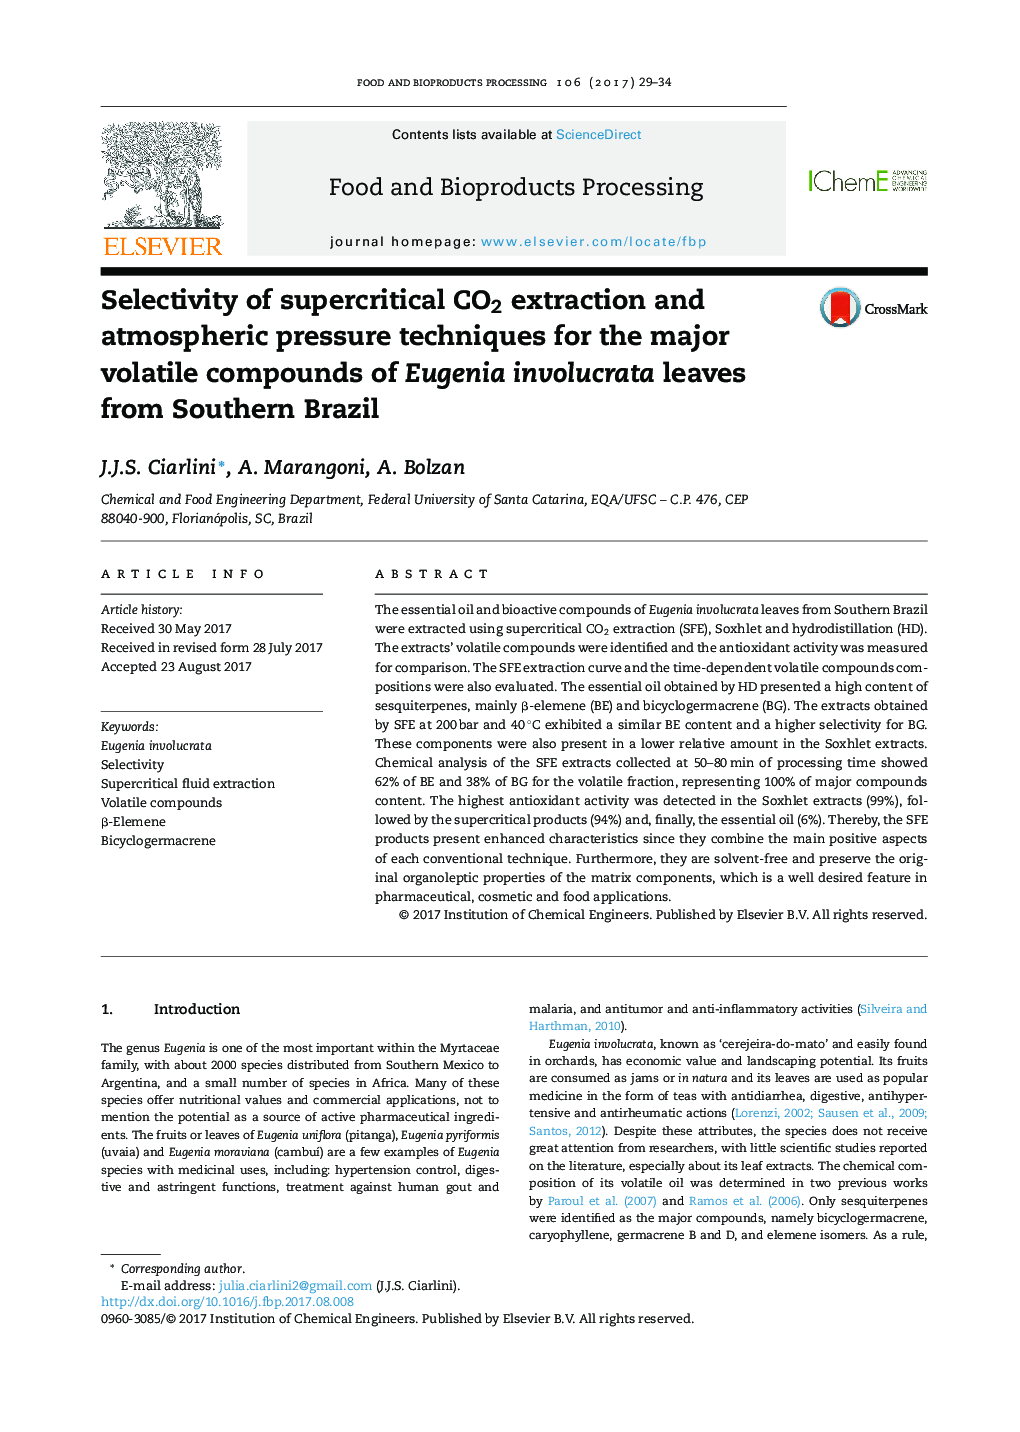 Selectivity of supercritical CO2 extraction and atmospheric pressure techniques for the major volatile compounds of Eugenia involucrata leaves from Southern Brazil